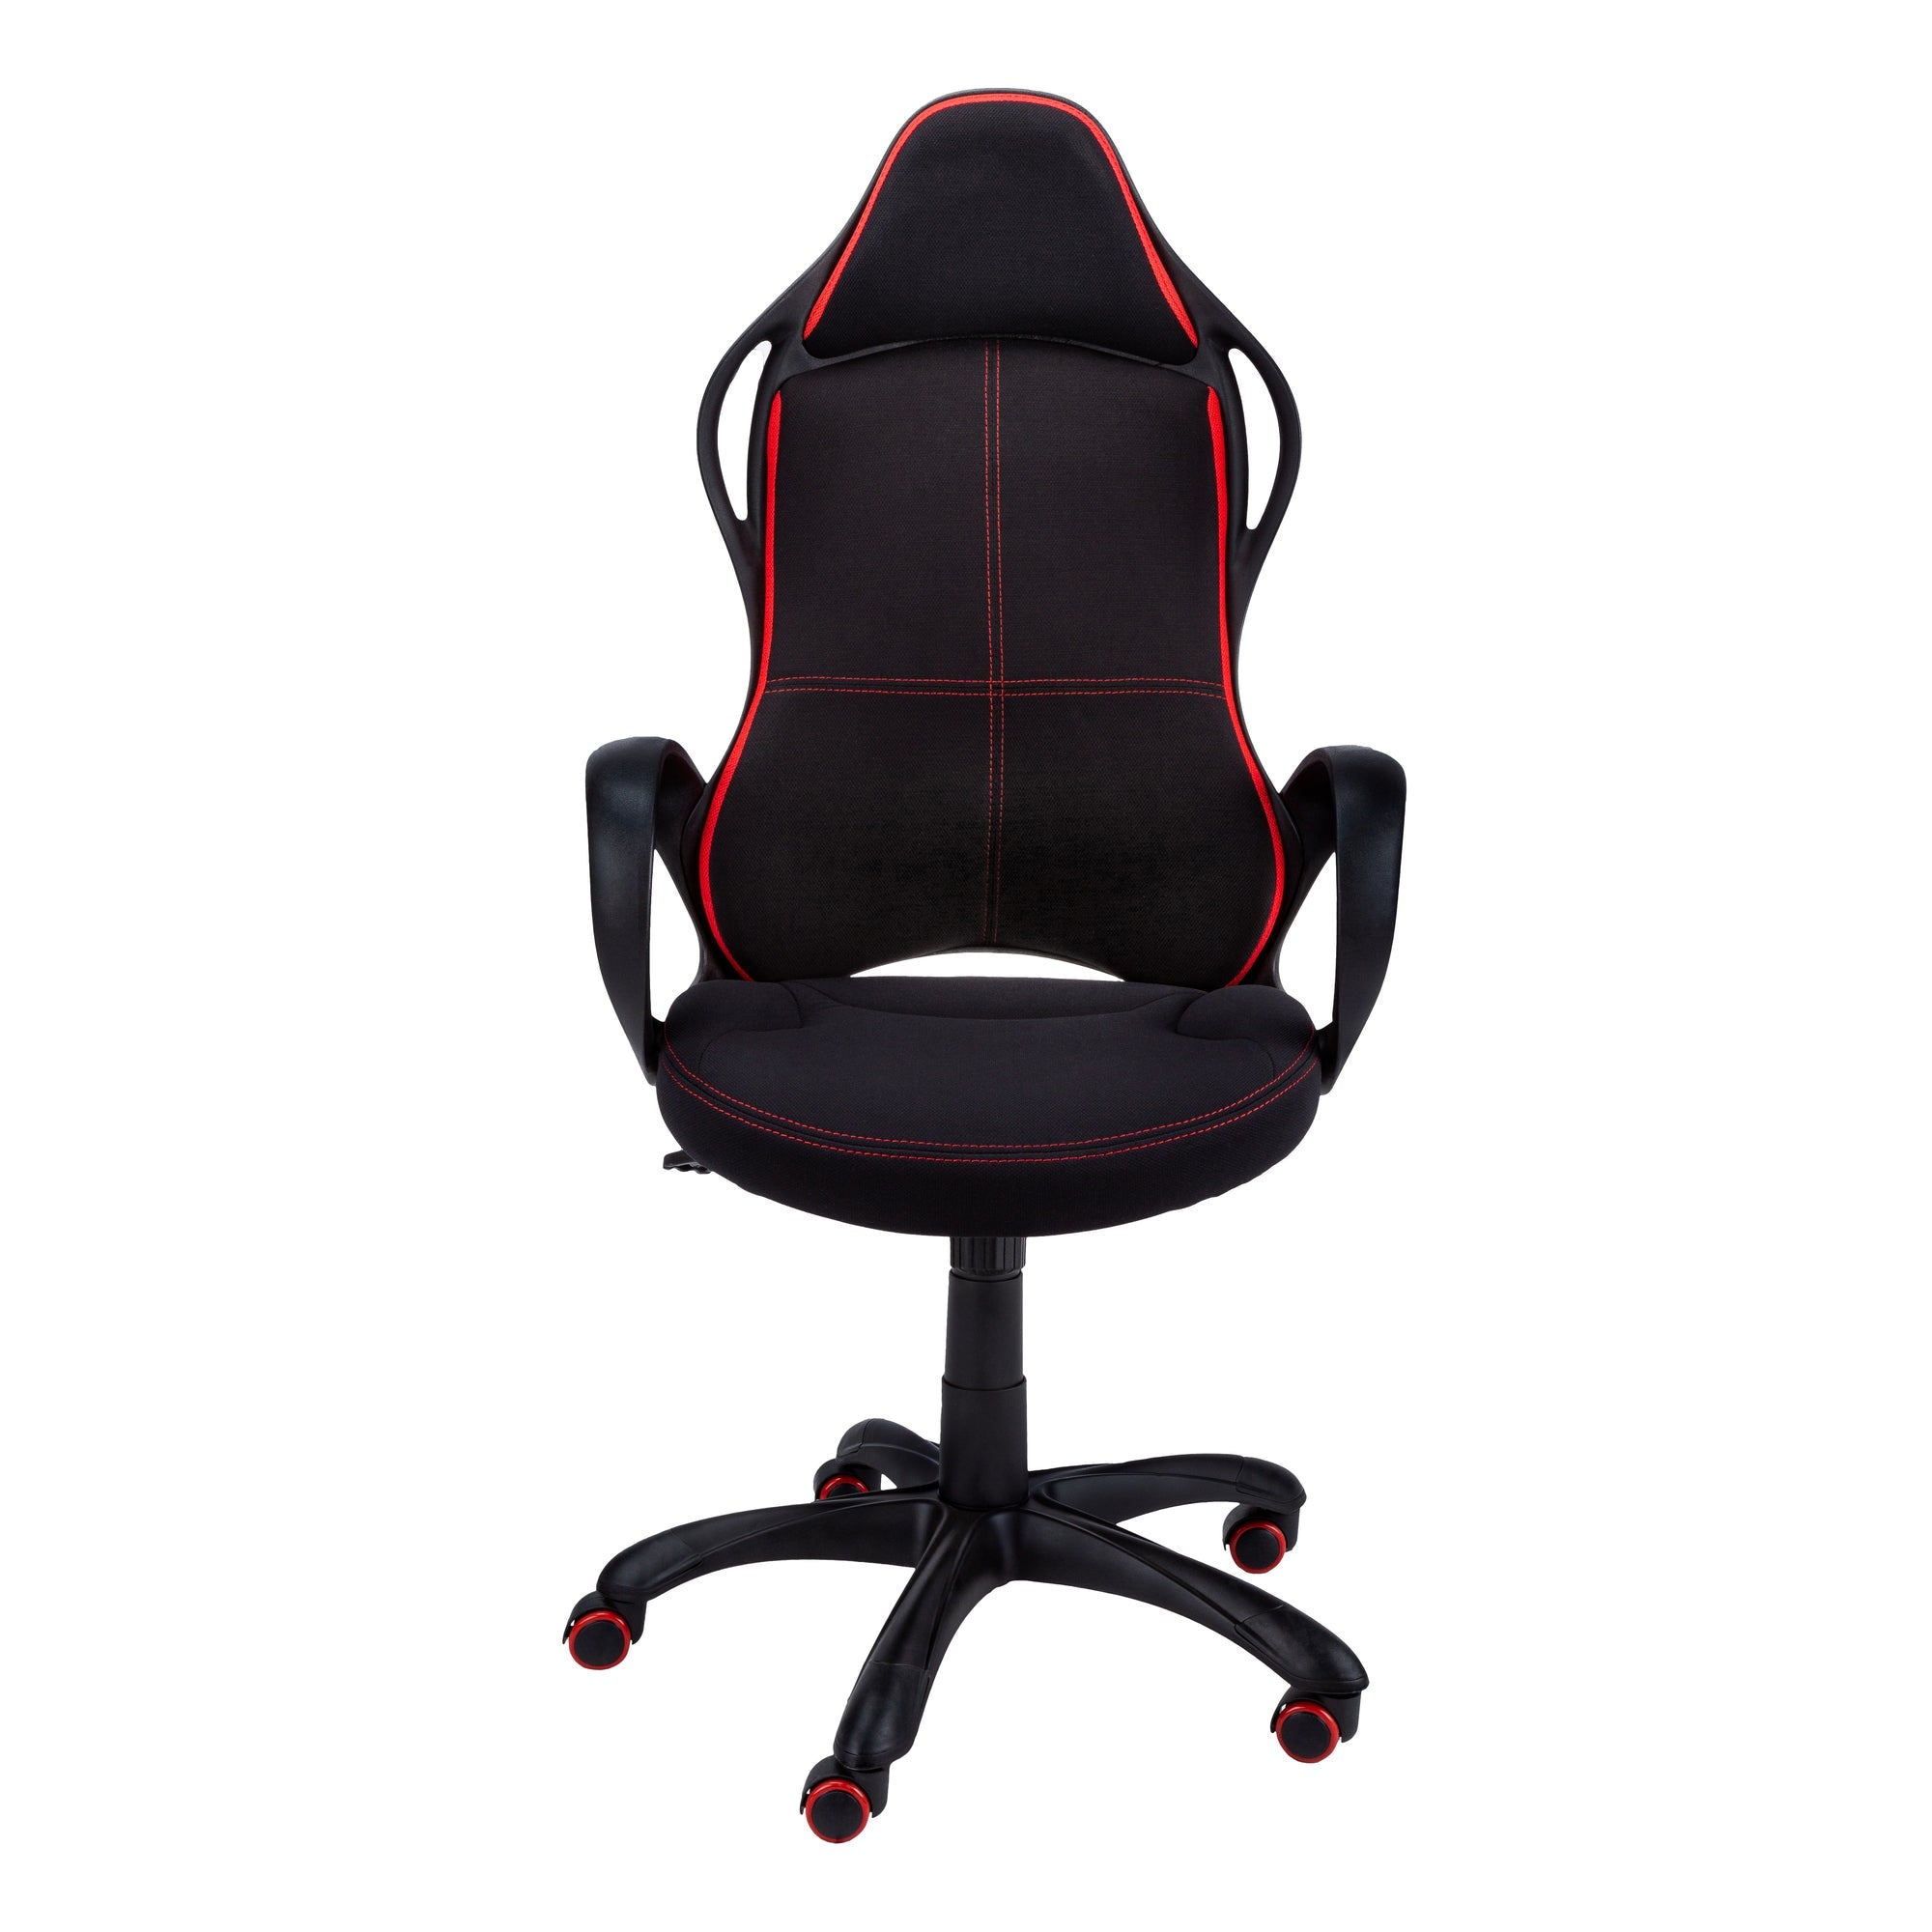 Black-Fabric-Tufted-Seat-Swivel-Adjustable-Gaming-Chair-Fabric-Back-Plastic-Frame-Office-Chairs